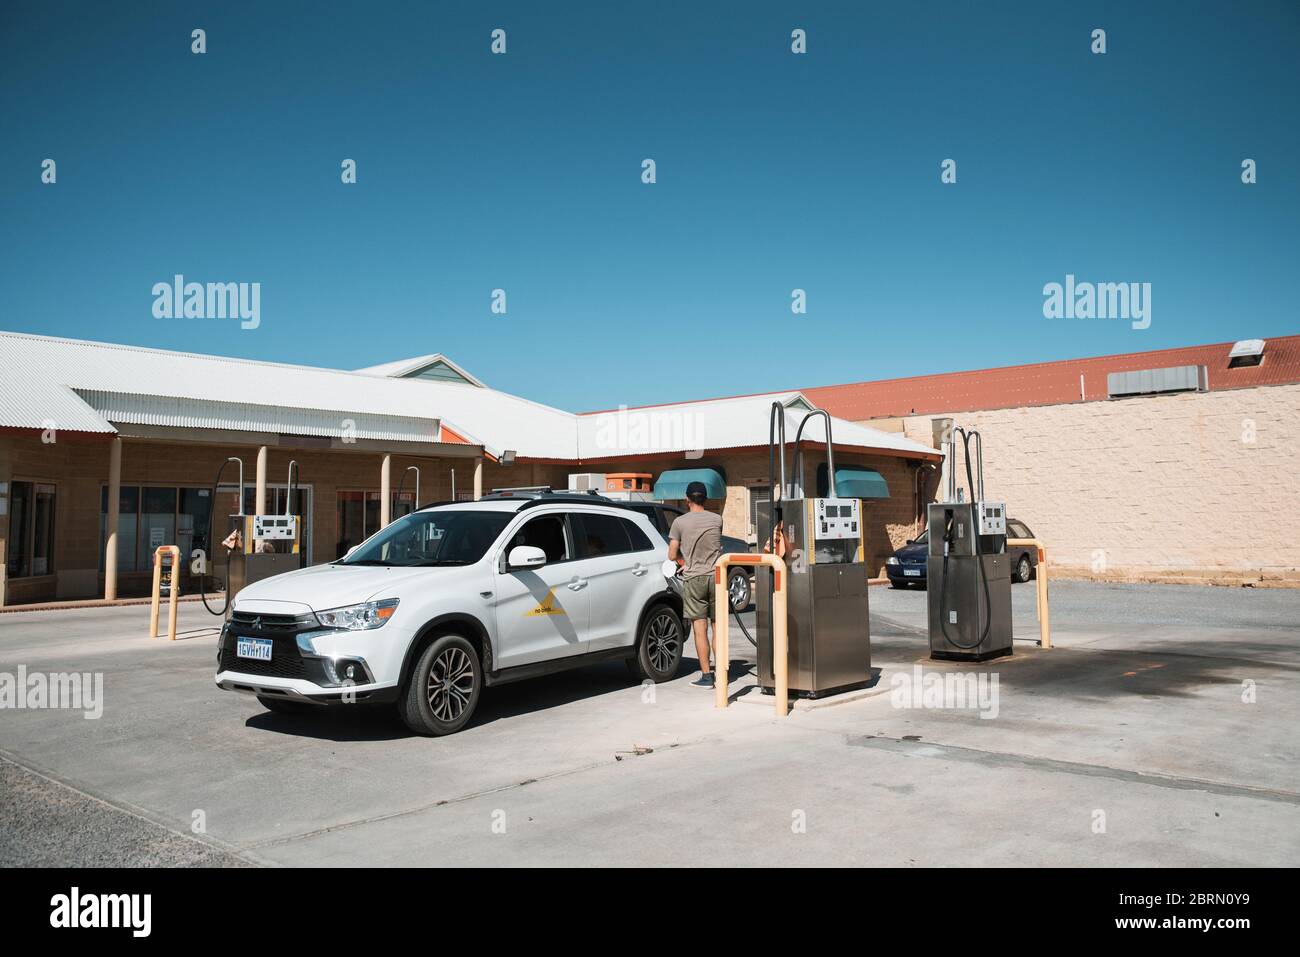 Denham, Nov 2019: Man tourist filling up rented car with petrol at gas station. Refueling a car with gasoline at self service petrol station Stock Photo